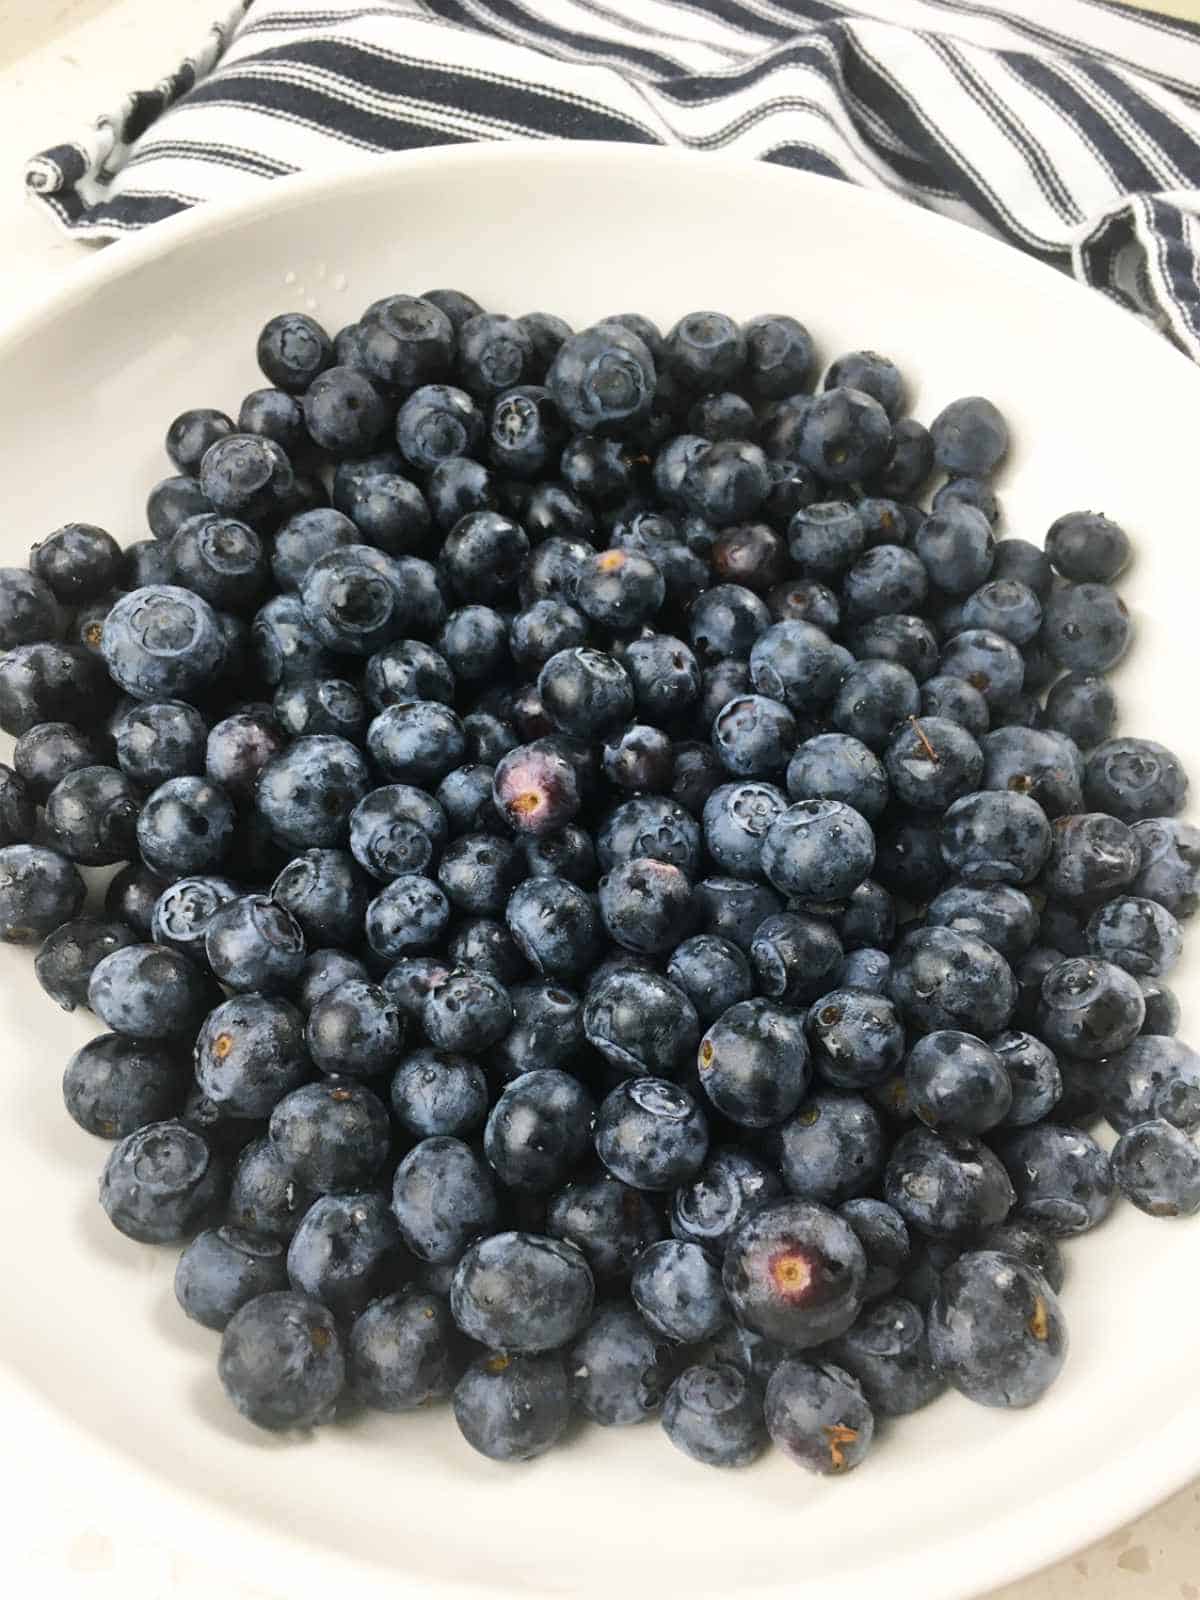 fresh washed blueberries in a bowl.